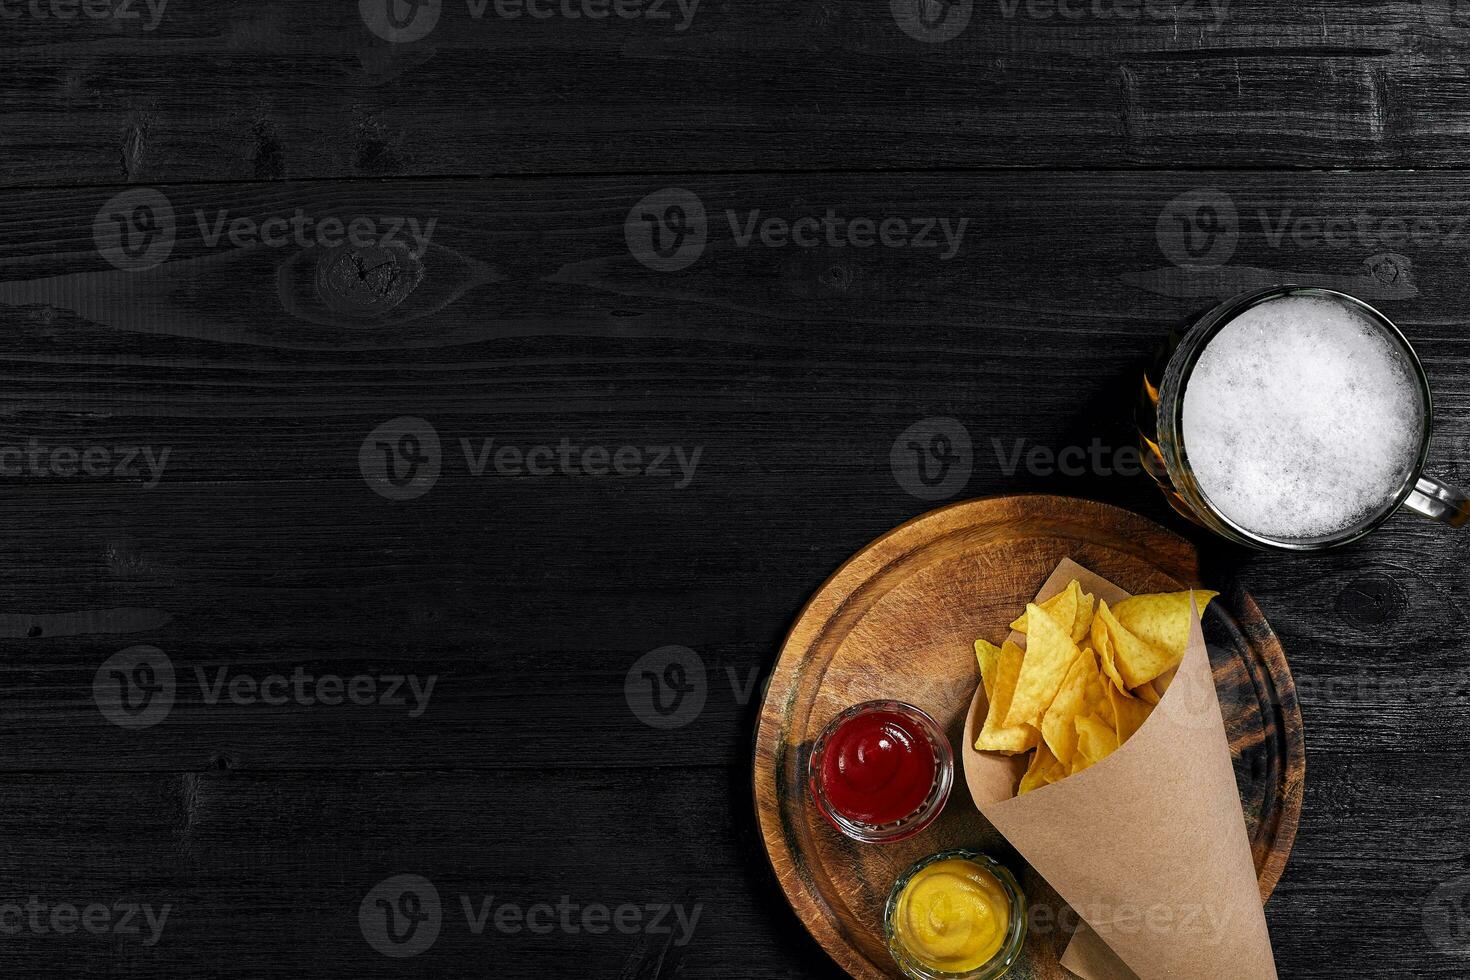 Top view of tortilla chips with sauce, glass of beer on black wooden background photo